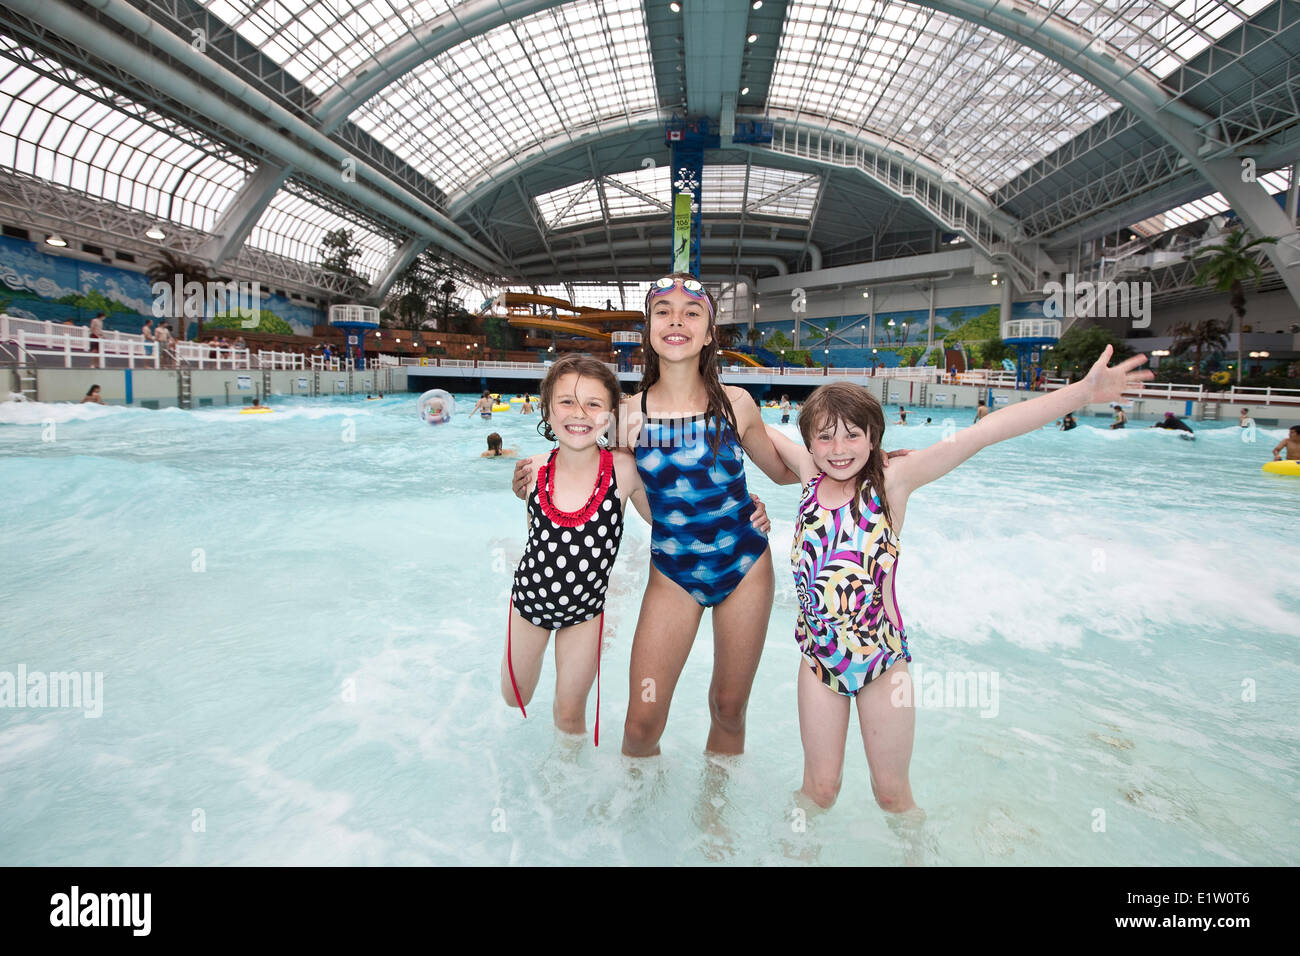 Three Young Girls Having A Great Time In The Waterpark At The West Edmonton Mall Edmonton Alberta Canada Stock Photo Alamy